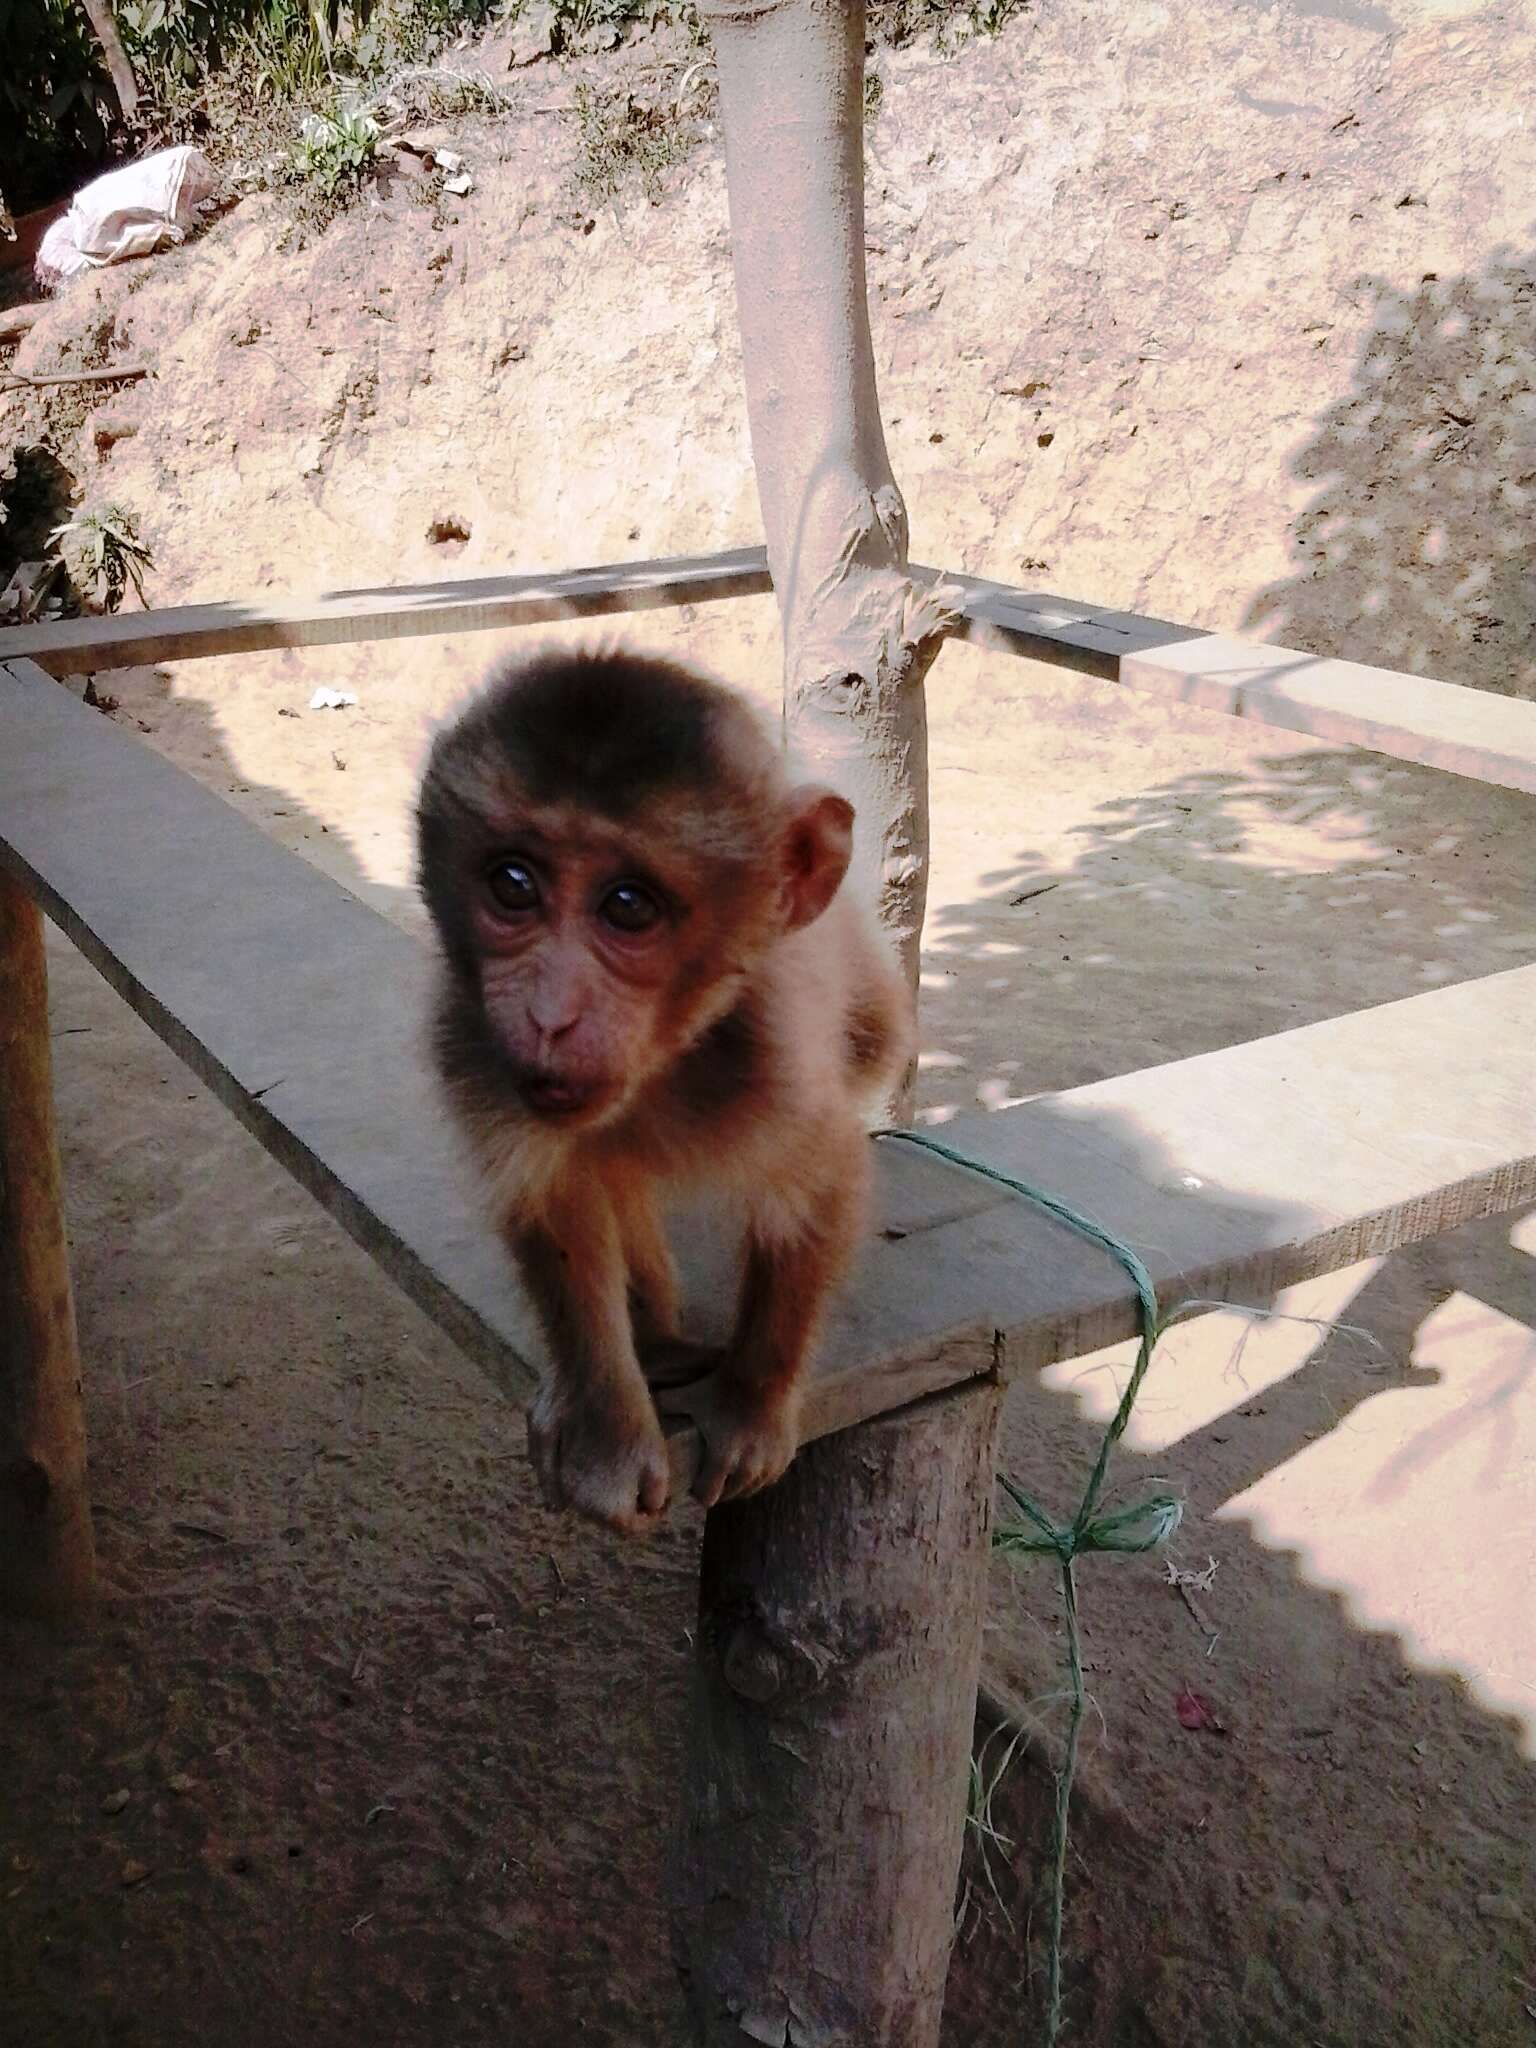 Image of Northern Pig-tailed Macaque